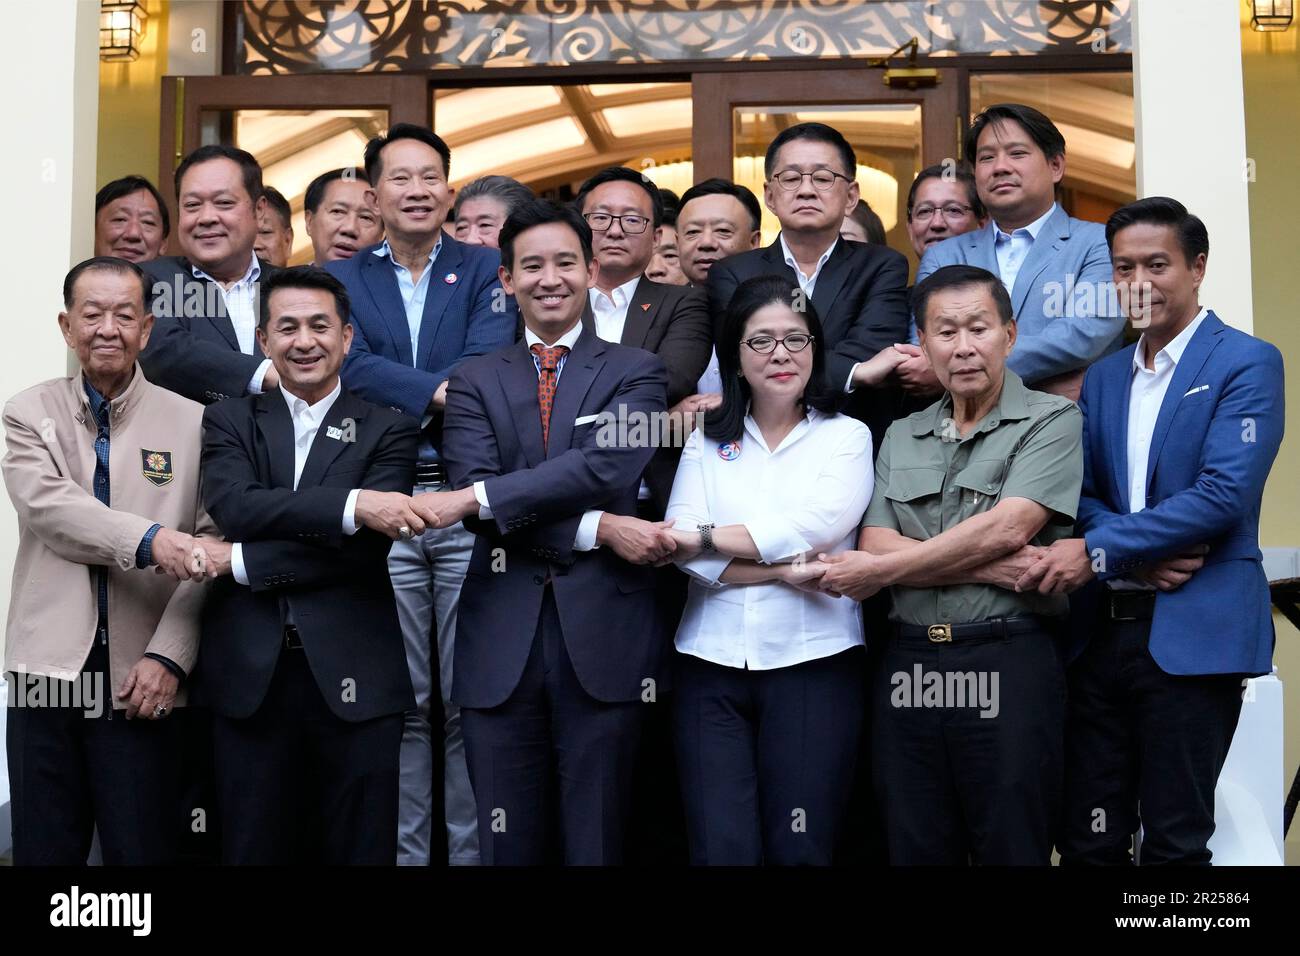 Leader of Prachachat Party Wan Muhamad Noor Matha, left to right Leader of  Pheu Thai party Chonlanan Srikaew, leader of Move Forward Party Pita  Limjaroenrat, leader of Thai Sang Thai party Sudarat